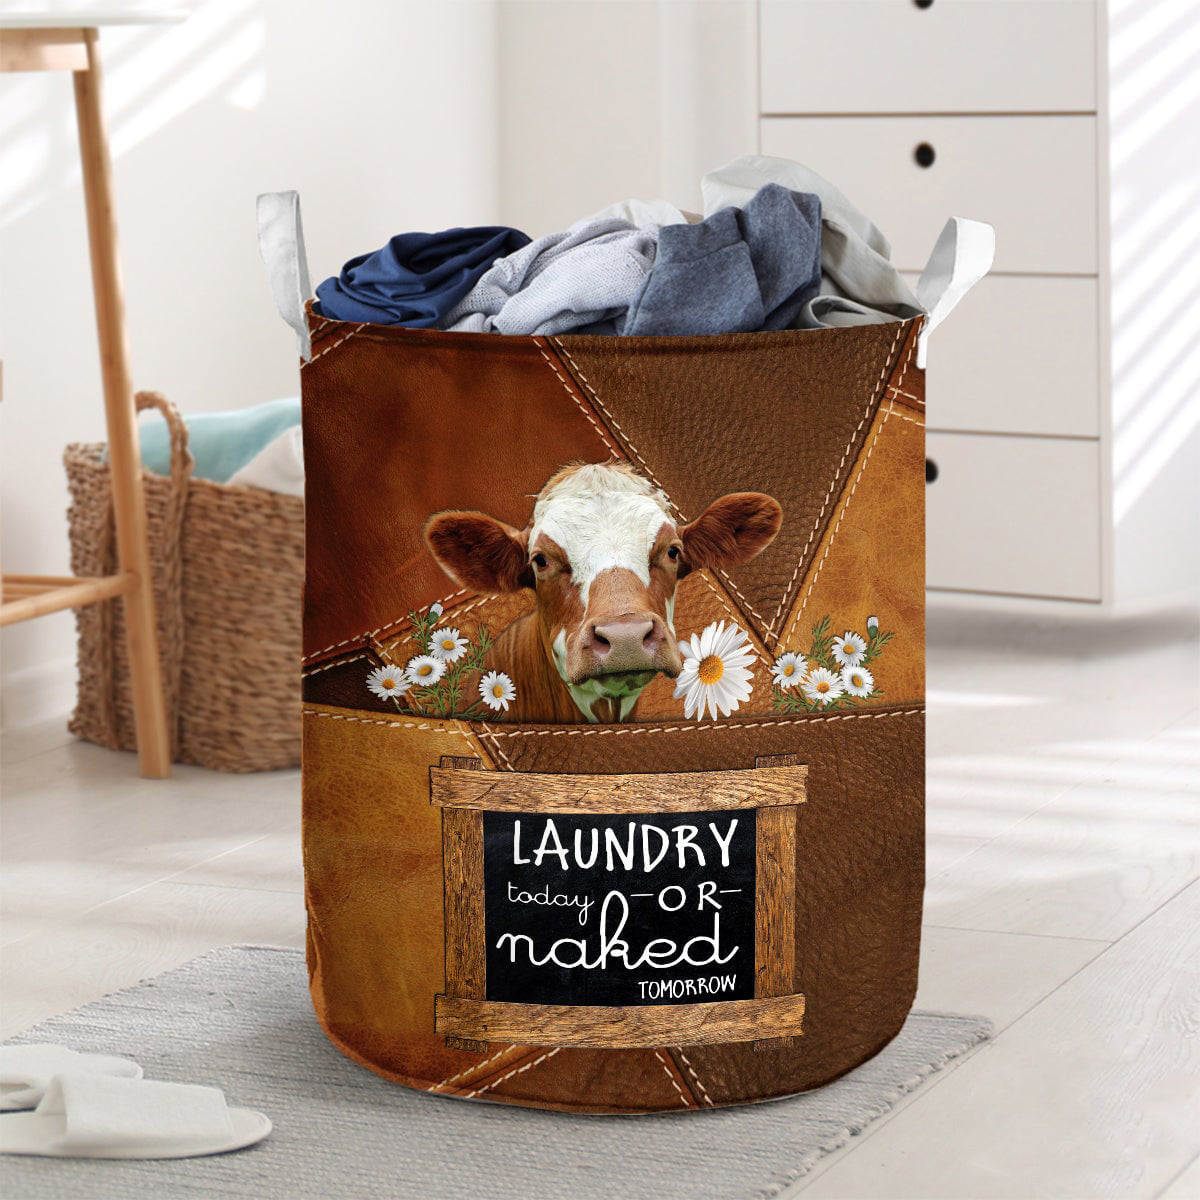 Simmental cattle-laundry today or naked tomorrow laundry basket